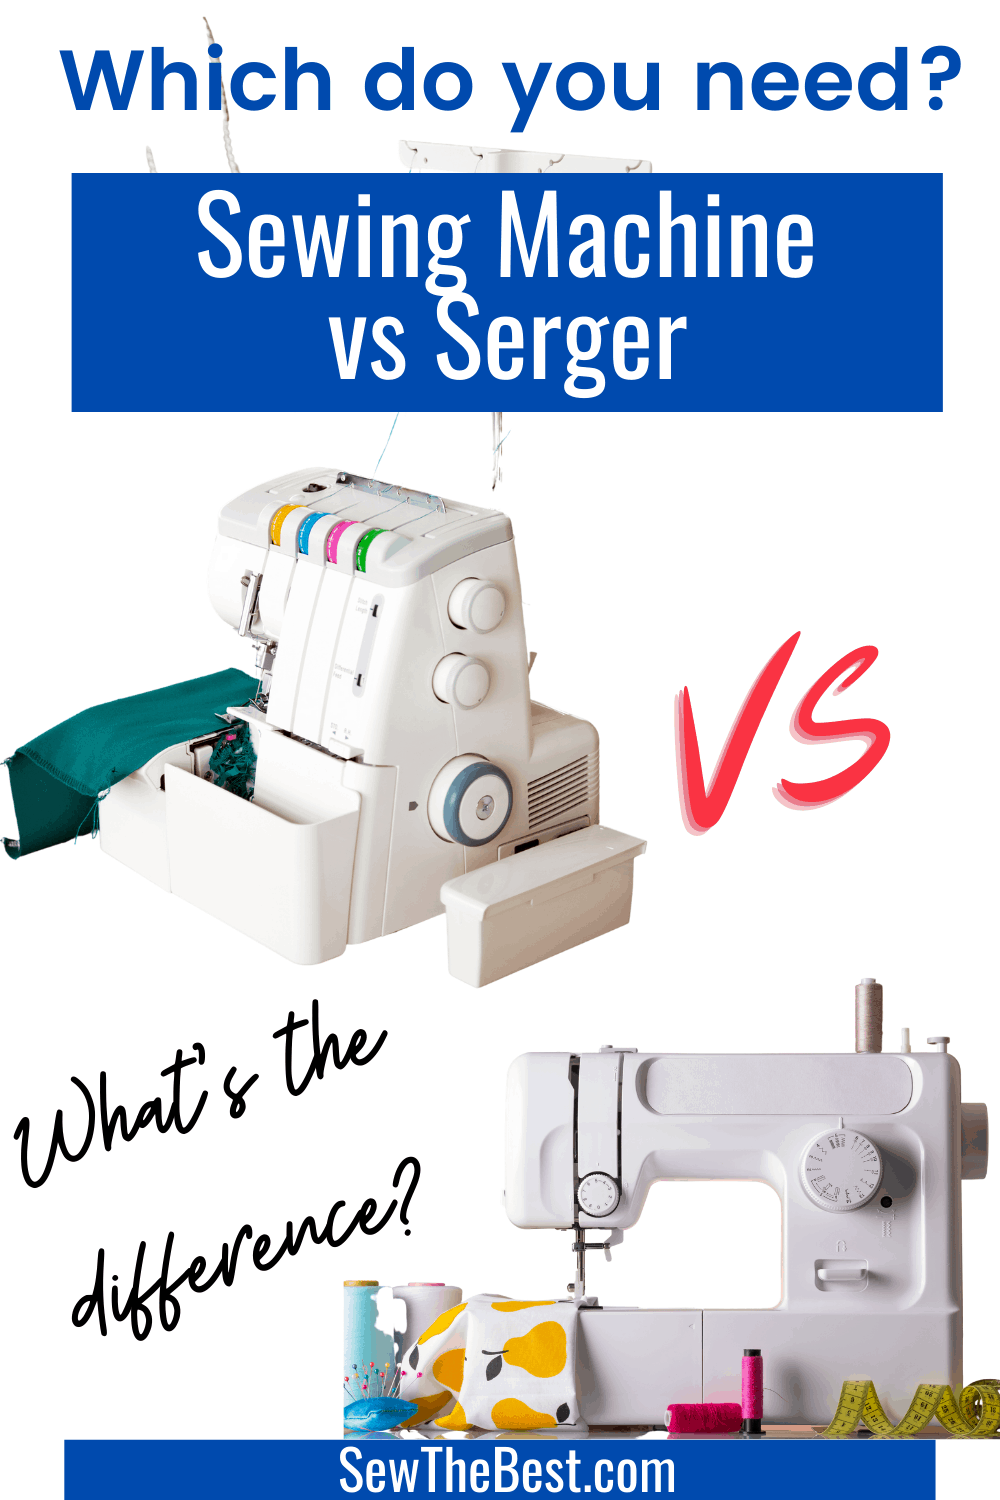 Which do you need? Sewing Machine vs Serger. What's the difference? #AD #Sewing